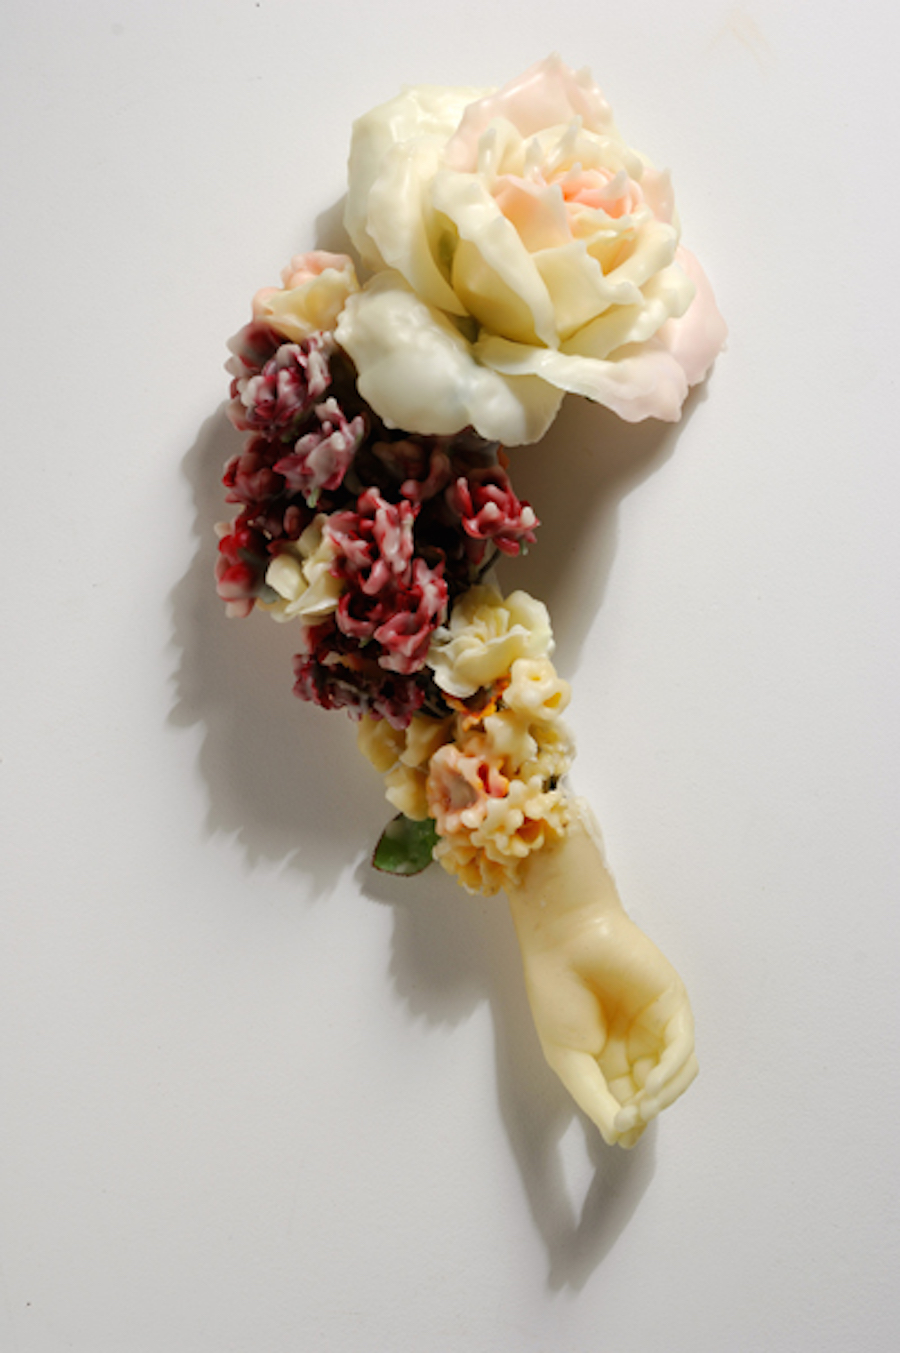 Surprising Floral Sculptures made of Wax1